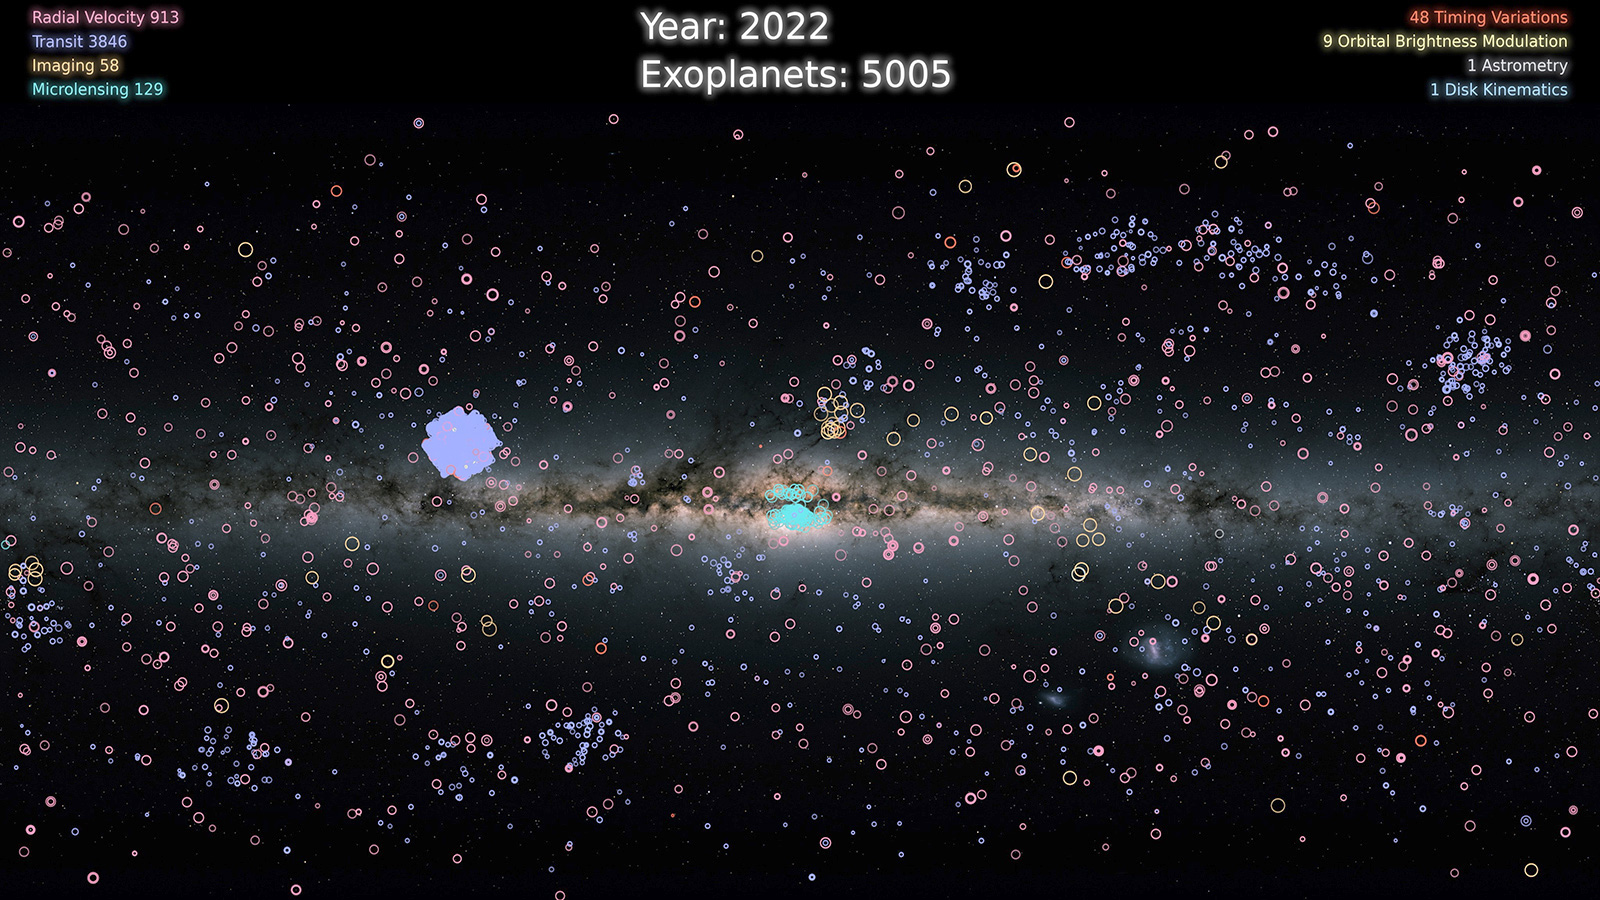 slide 5 - 5,000 circles are seen across the galactic plane, indicating 5,000 exoplanets confirmed by NASA.